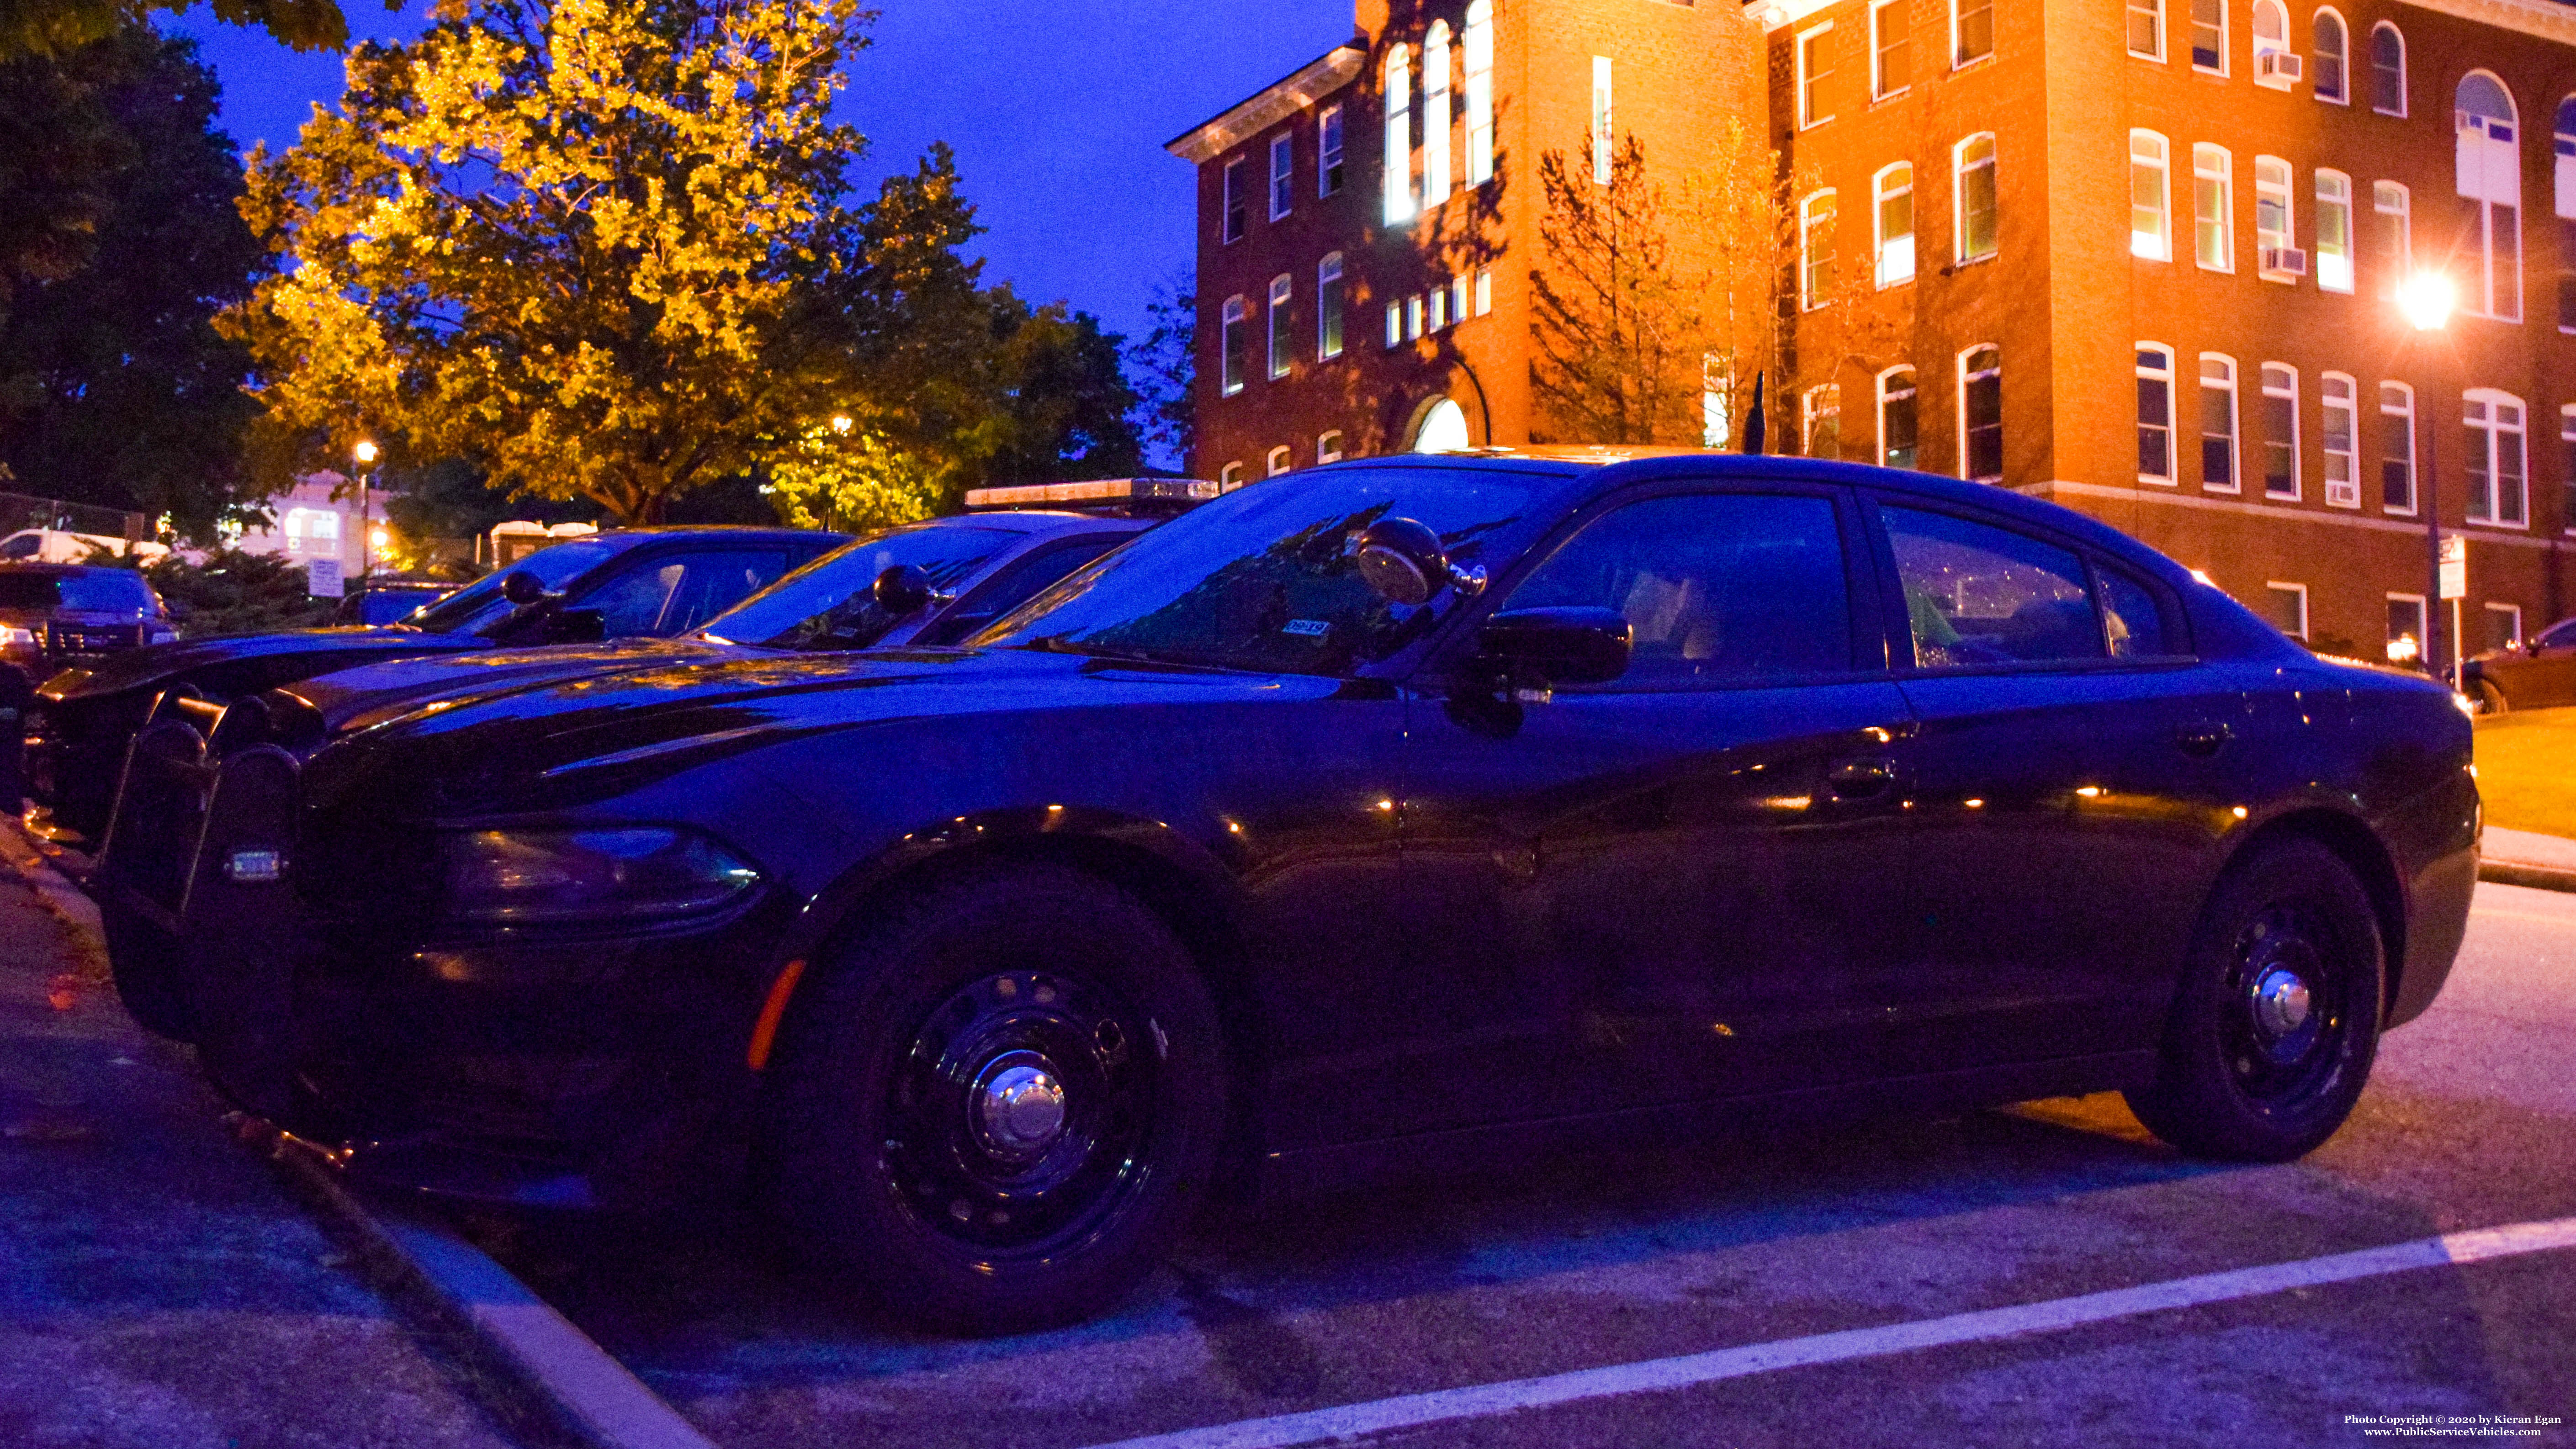 A photo  of New Hampshire State Police
            Cruiser 505, a 2015-2019 Dodge Charger             taken by Kieran Egan